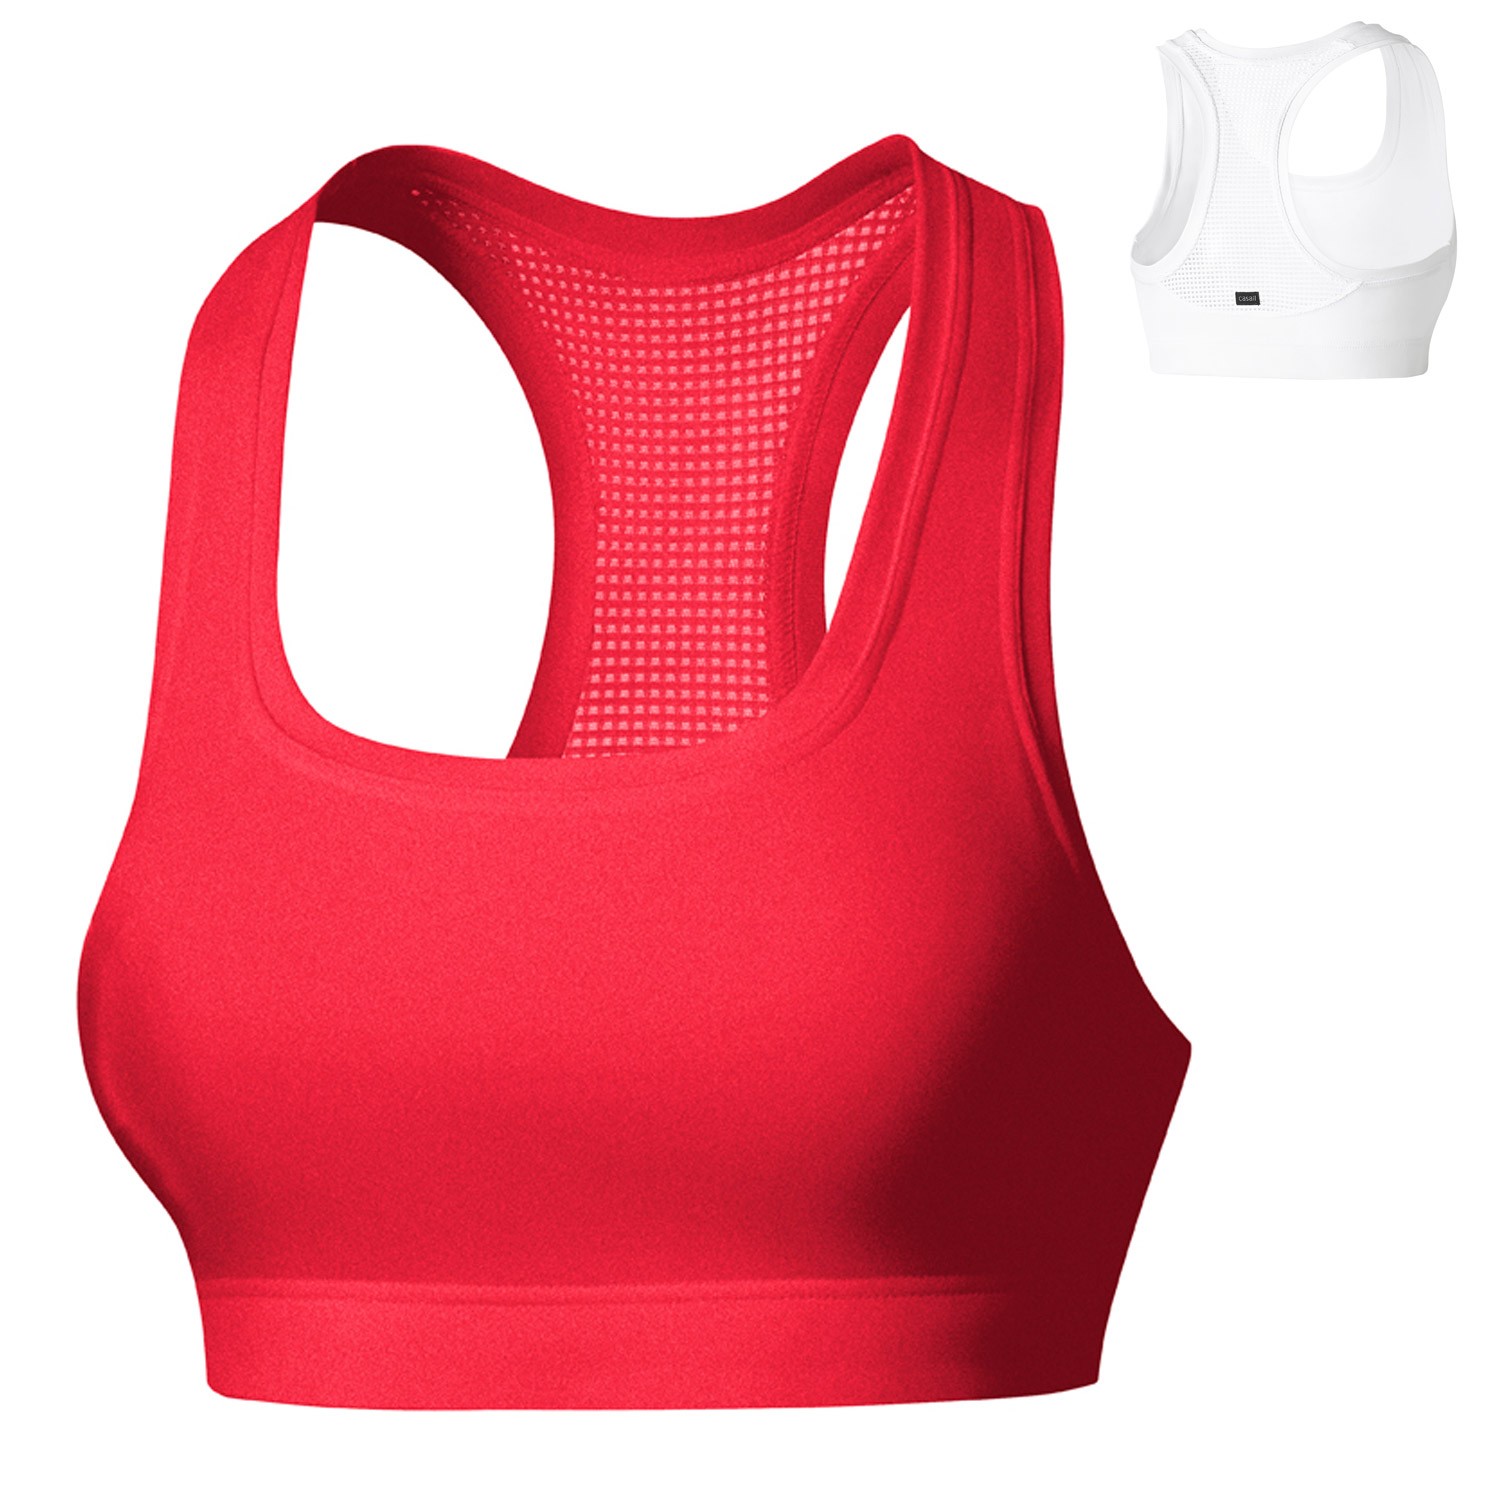 Casall Iconic Sports Bra C/D Red